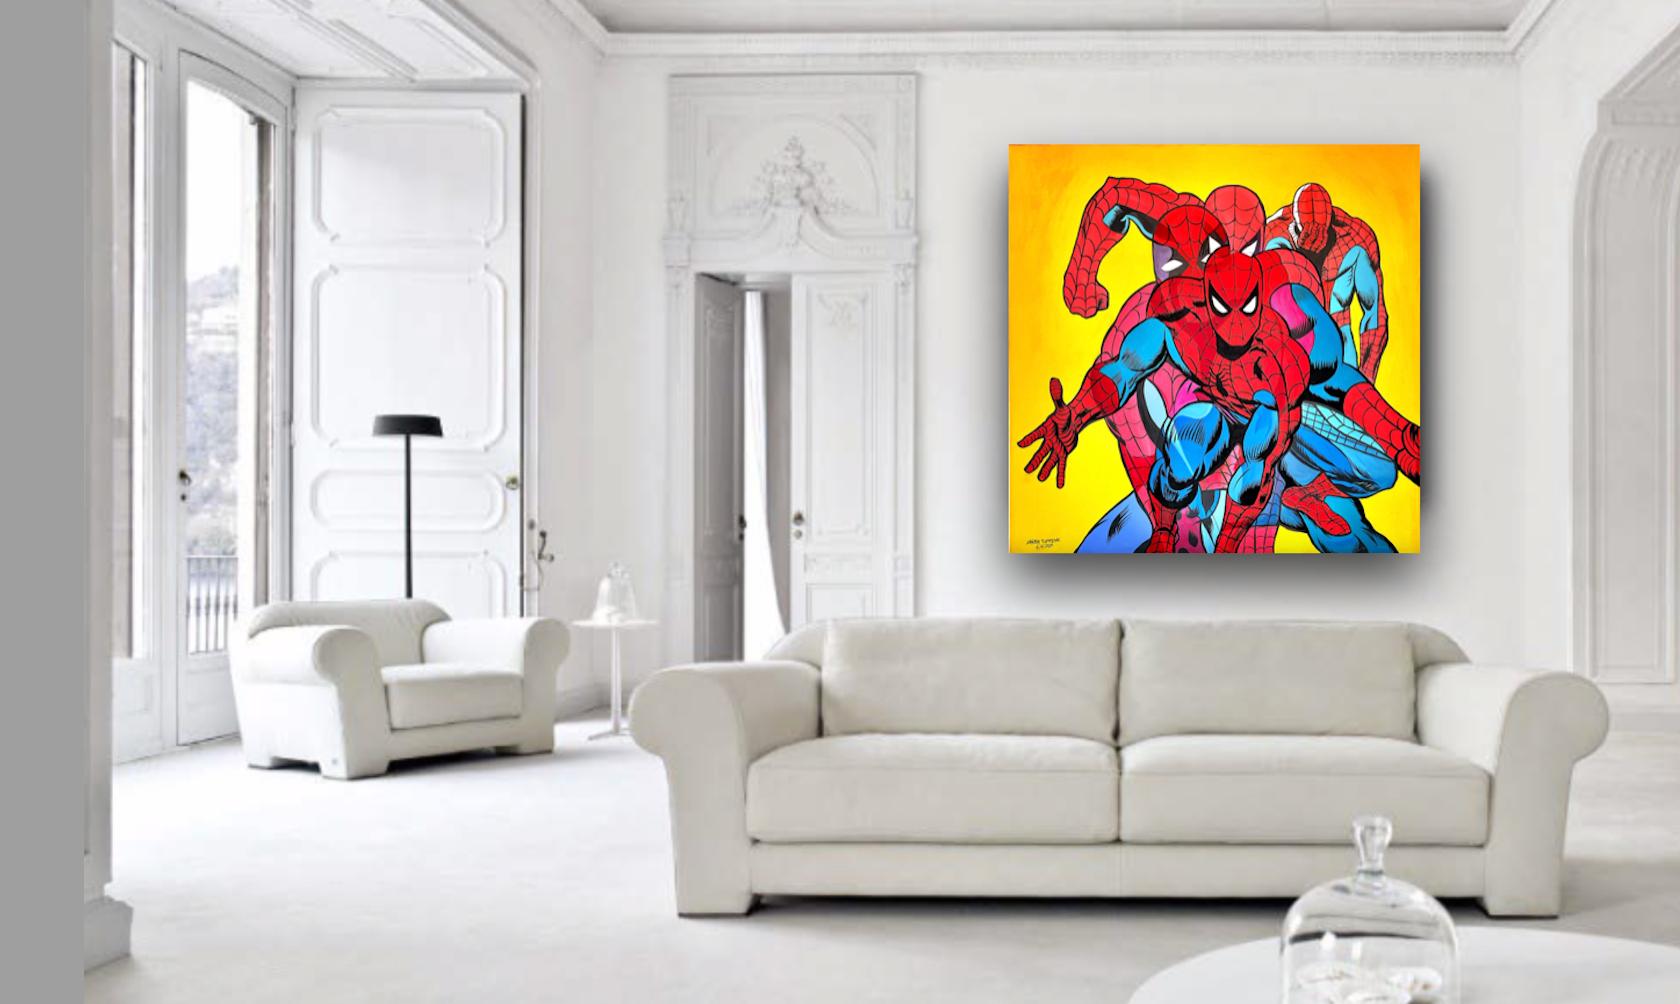 Artist: L'Amour Supreme
Title: Emerging
Medium: Acrylic, mixed media on canvas
Size: 48 x 48 inches
Description:  From a hot yellow backdrop, emerges the multiple bright blue and red motions of Spiderman. 


Discovered as a teen by the seminal